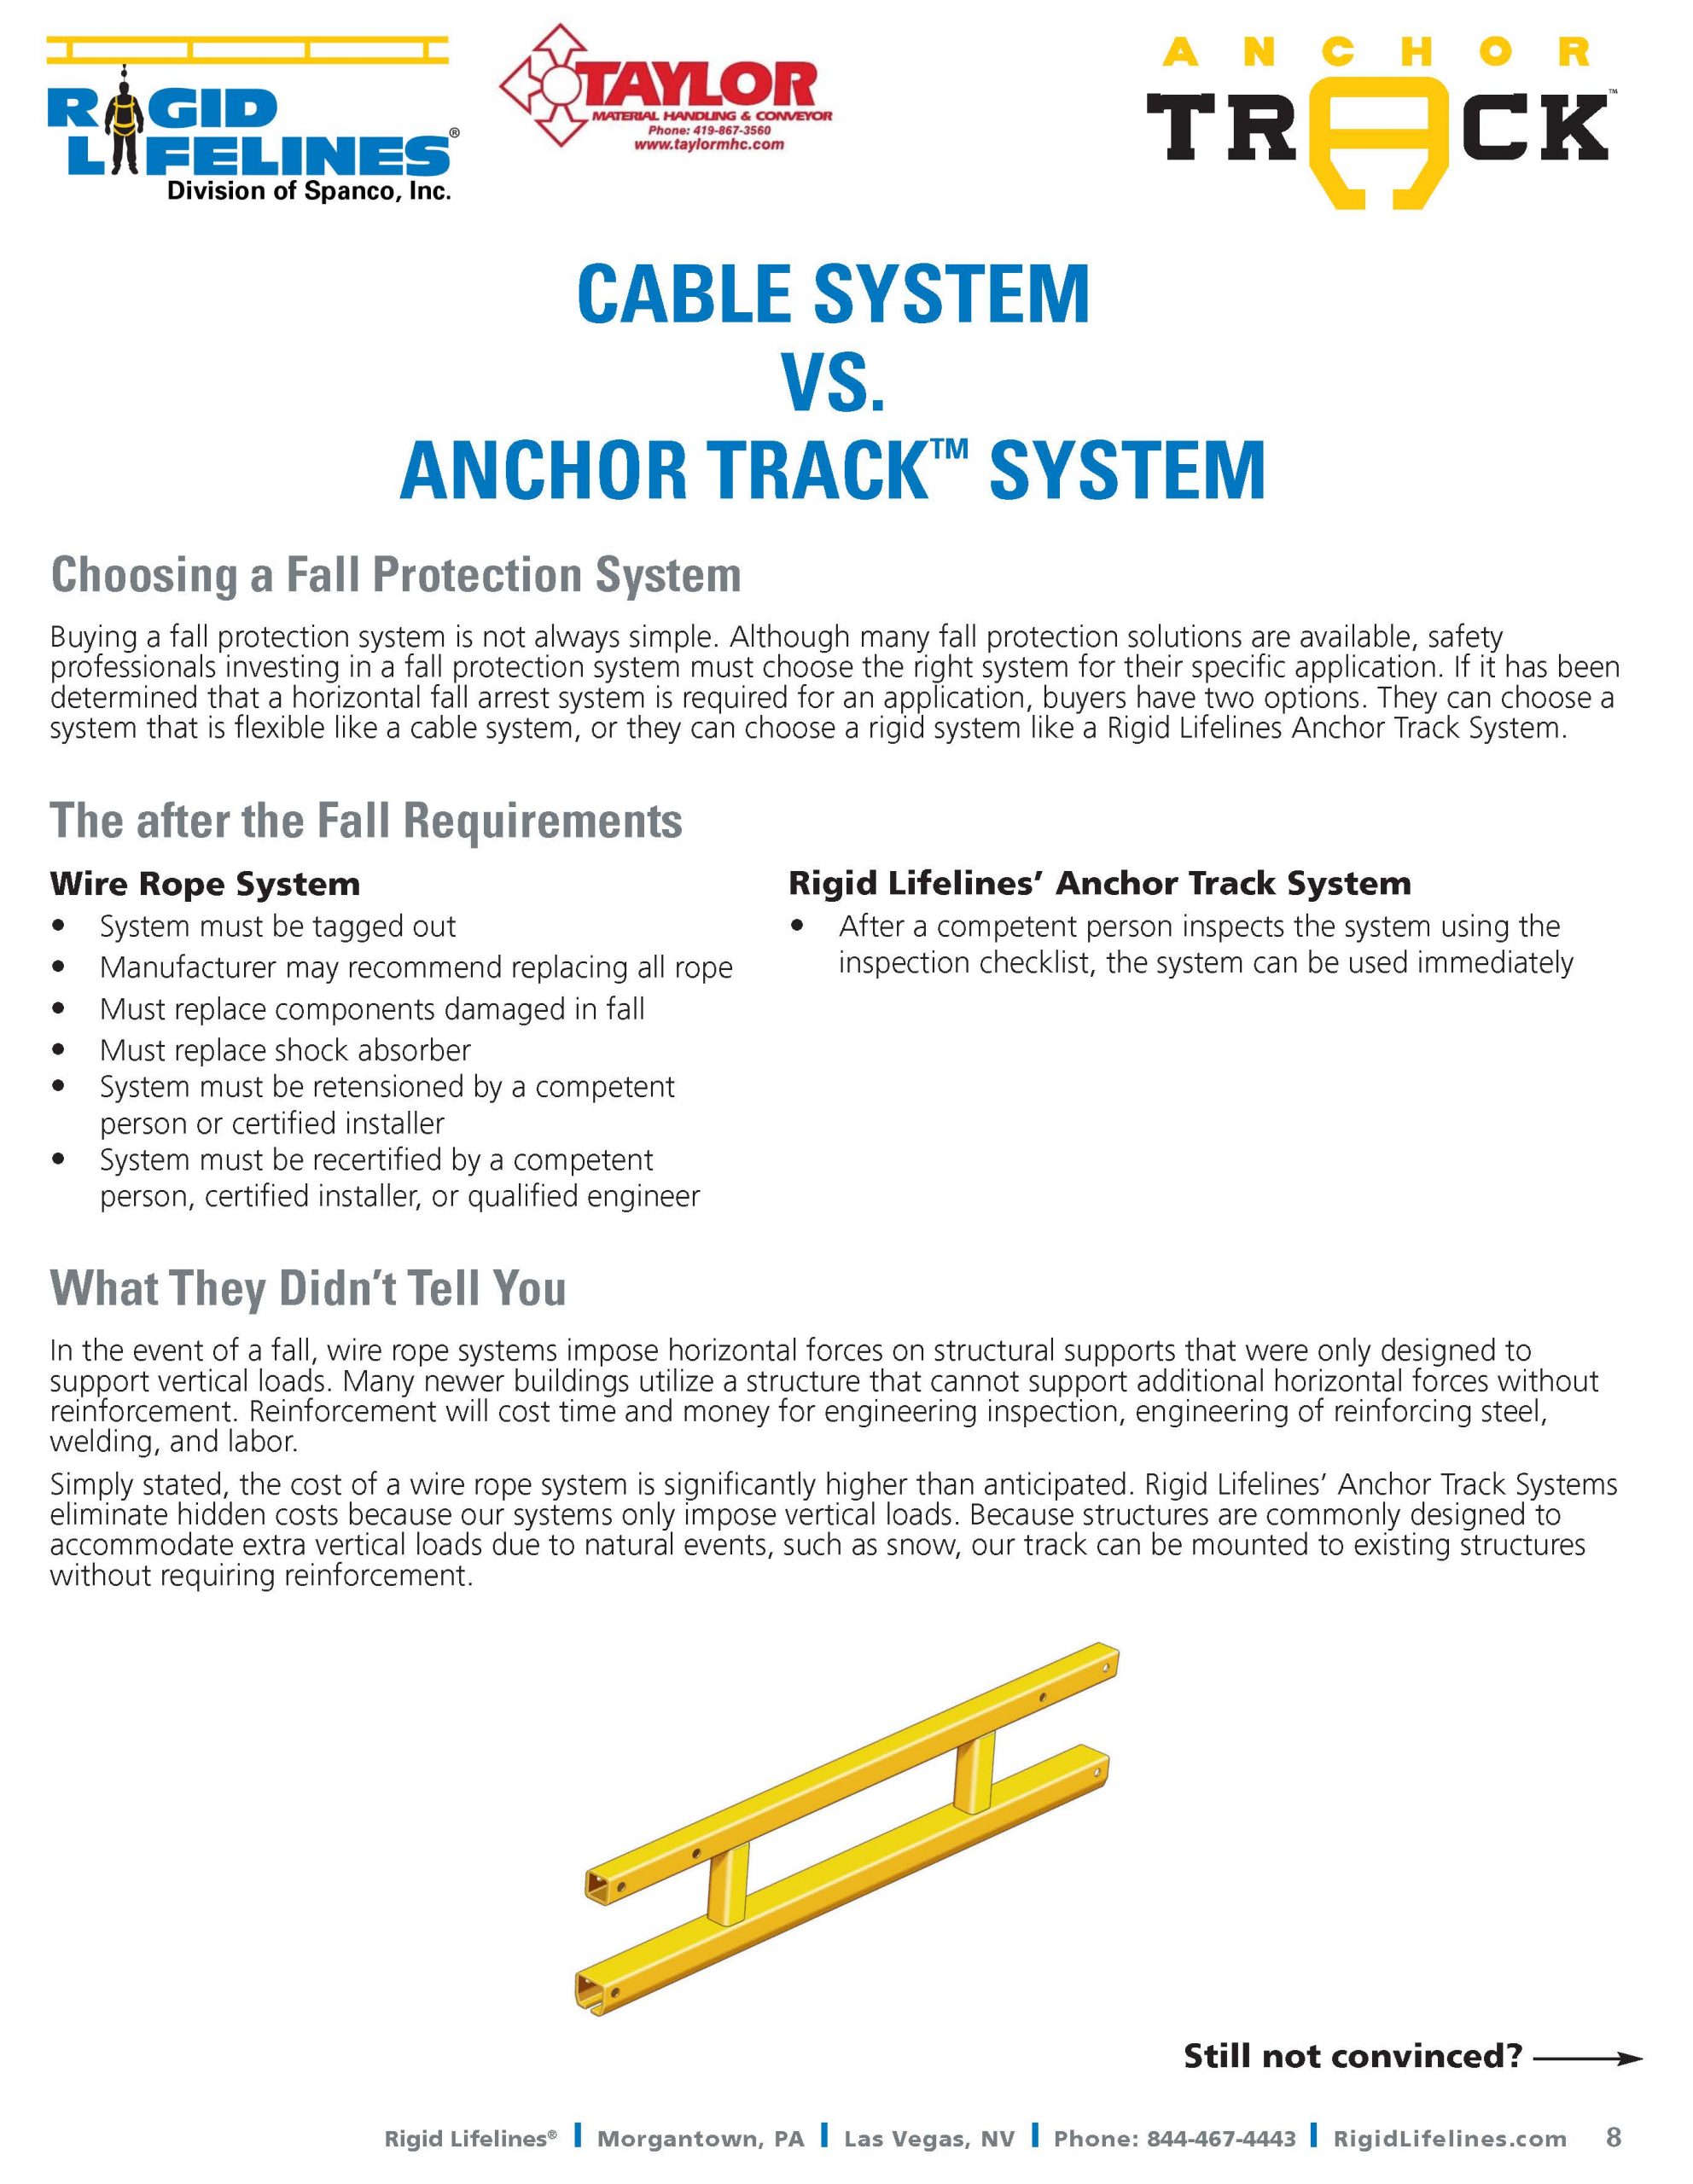 Spanco Cable VS. Track Flyer